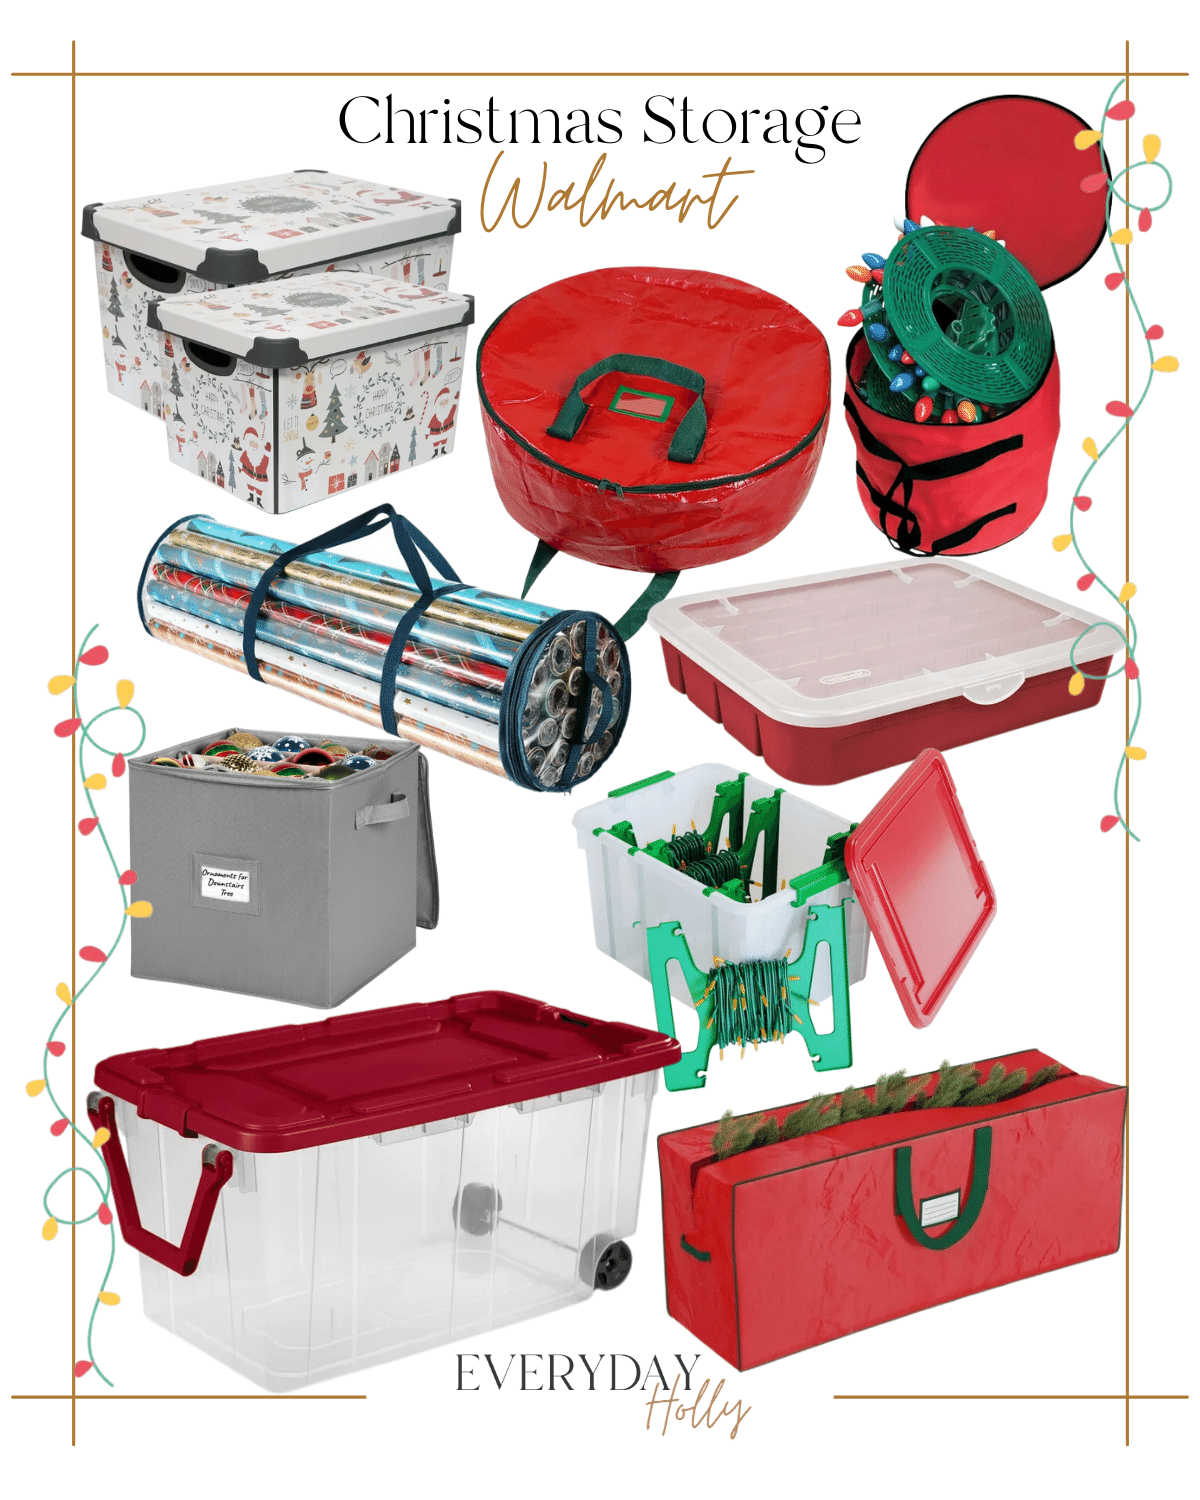 wrap up christmas quality storage and organization | #wrapup #christmas #storage #organization #holidays #tote #box #wreath #christmastree #christmaslights #lights #wrappingpaper #tote #wheels